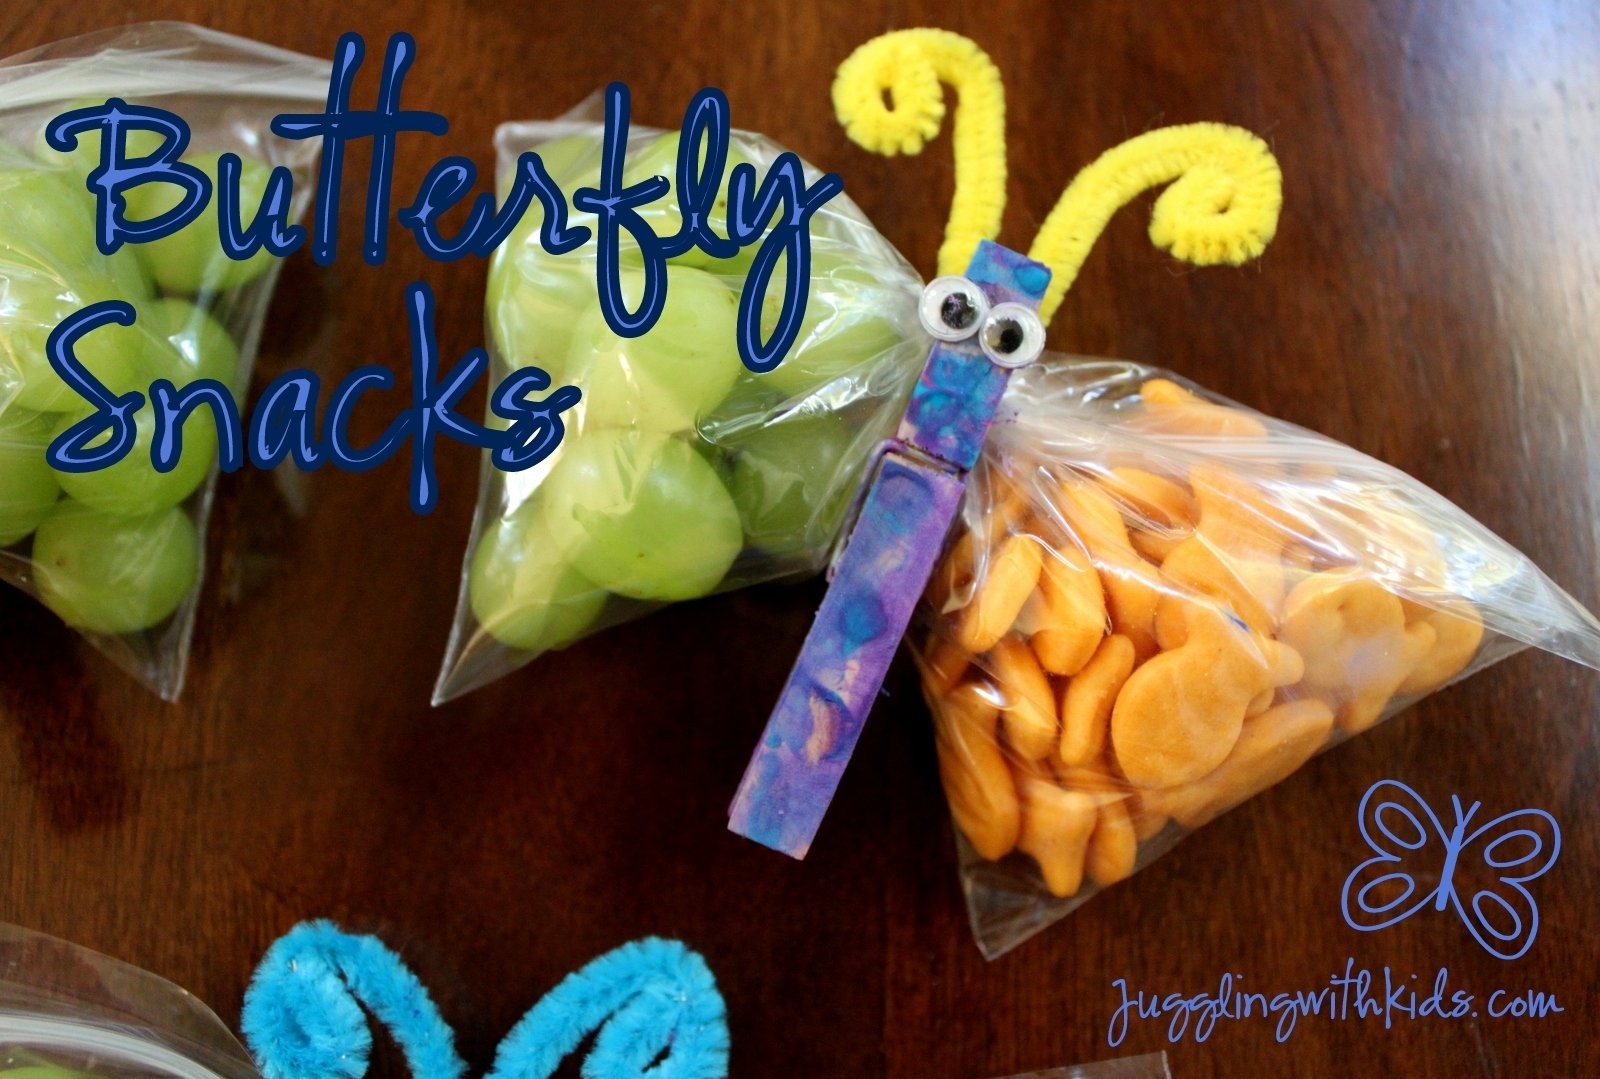 10 Attractive Snack Ideas For Kindergarten Class butterfly snacks juggling with kids 1 2022